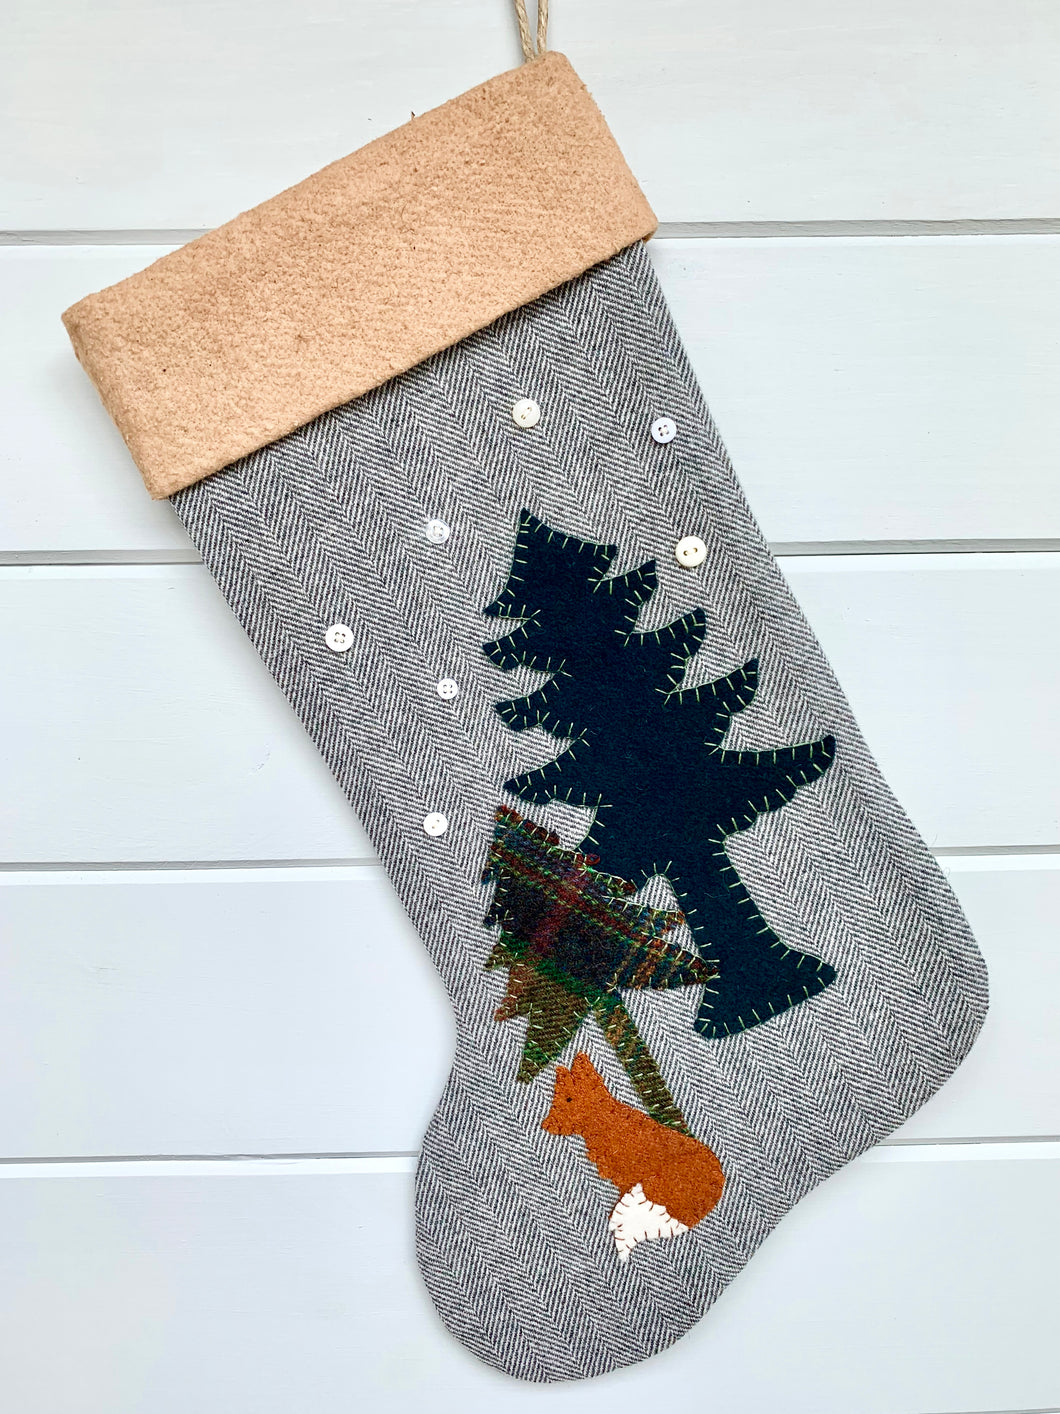 fox Christmas stocking, stocking is gray herringbone wool fabric, tall pine tree is dark green wool fabric, short pine tree is green plaid wool fabric, fox is rustic orange wool fabric with a white wool fabric tip on the tail, black stitching used for eye, trees and fox are hand stitched onto the stocking, white snowflakes are hand stitched on the stocking, cuff is tea dyed cotton batting, woodland fox Christmas stocking, rustic Christmas stocking, large Christmas stocking